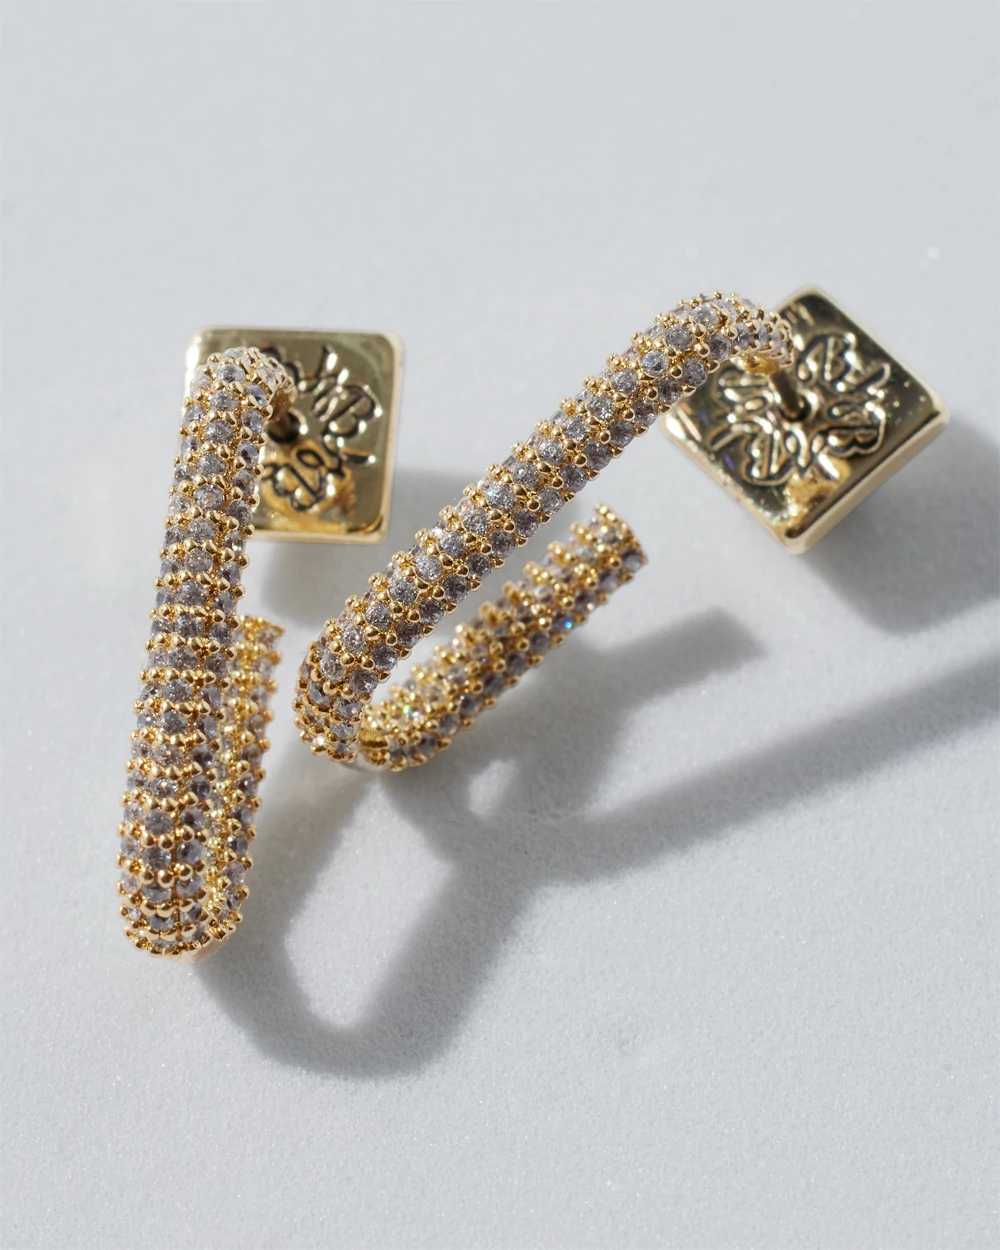 Gold Small Pave Crystal Hoop Earring click to view larger image.